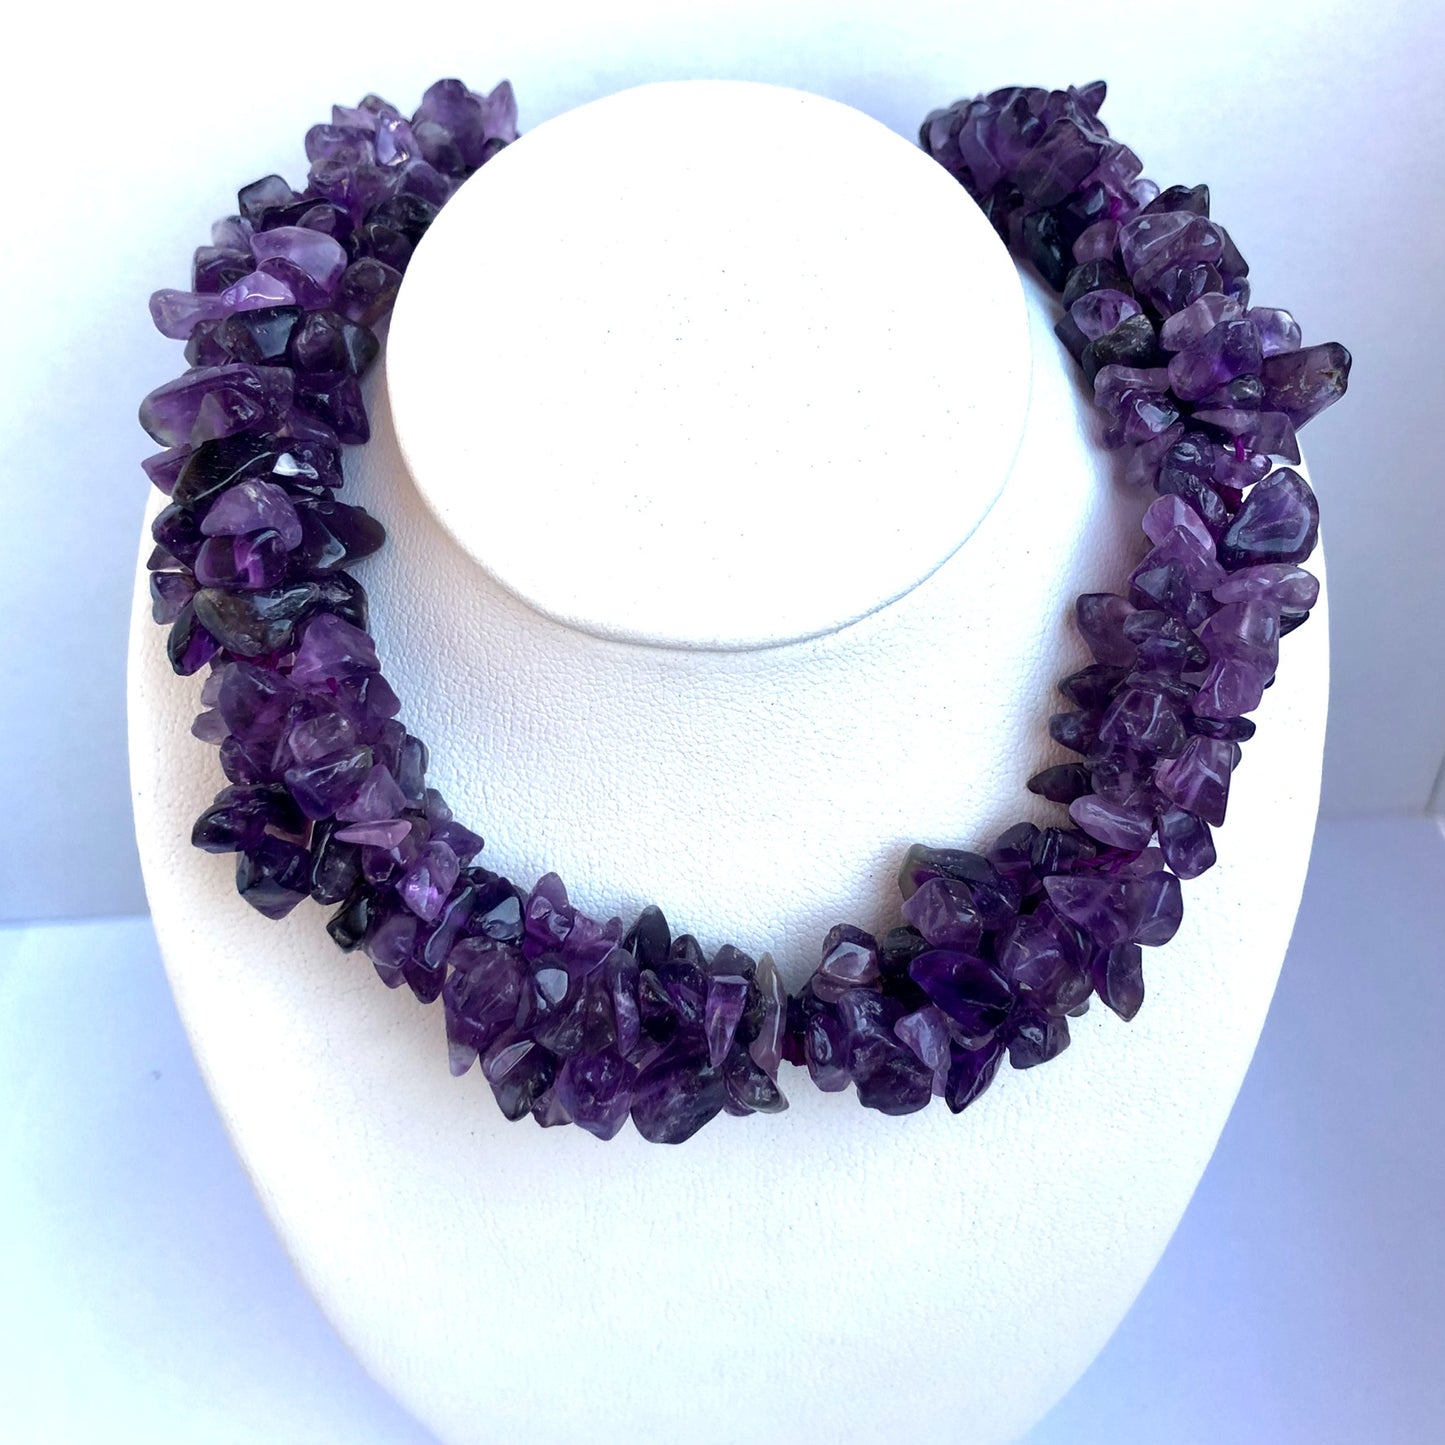 Genuine AMETHYST 4 Strands NECKLACE 17 Inches Long 925 Silver Details